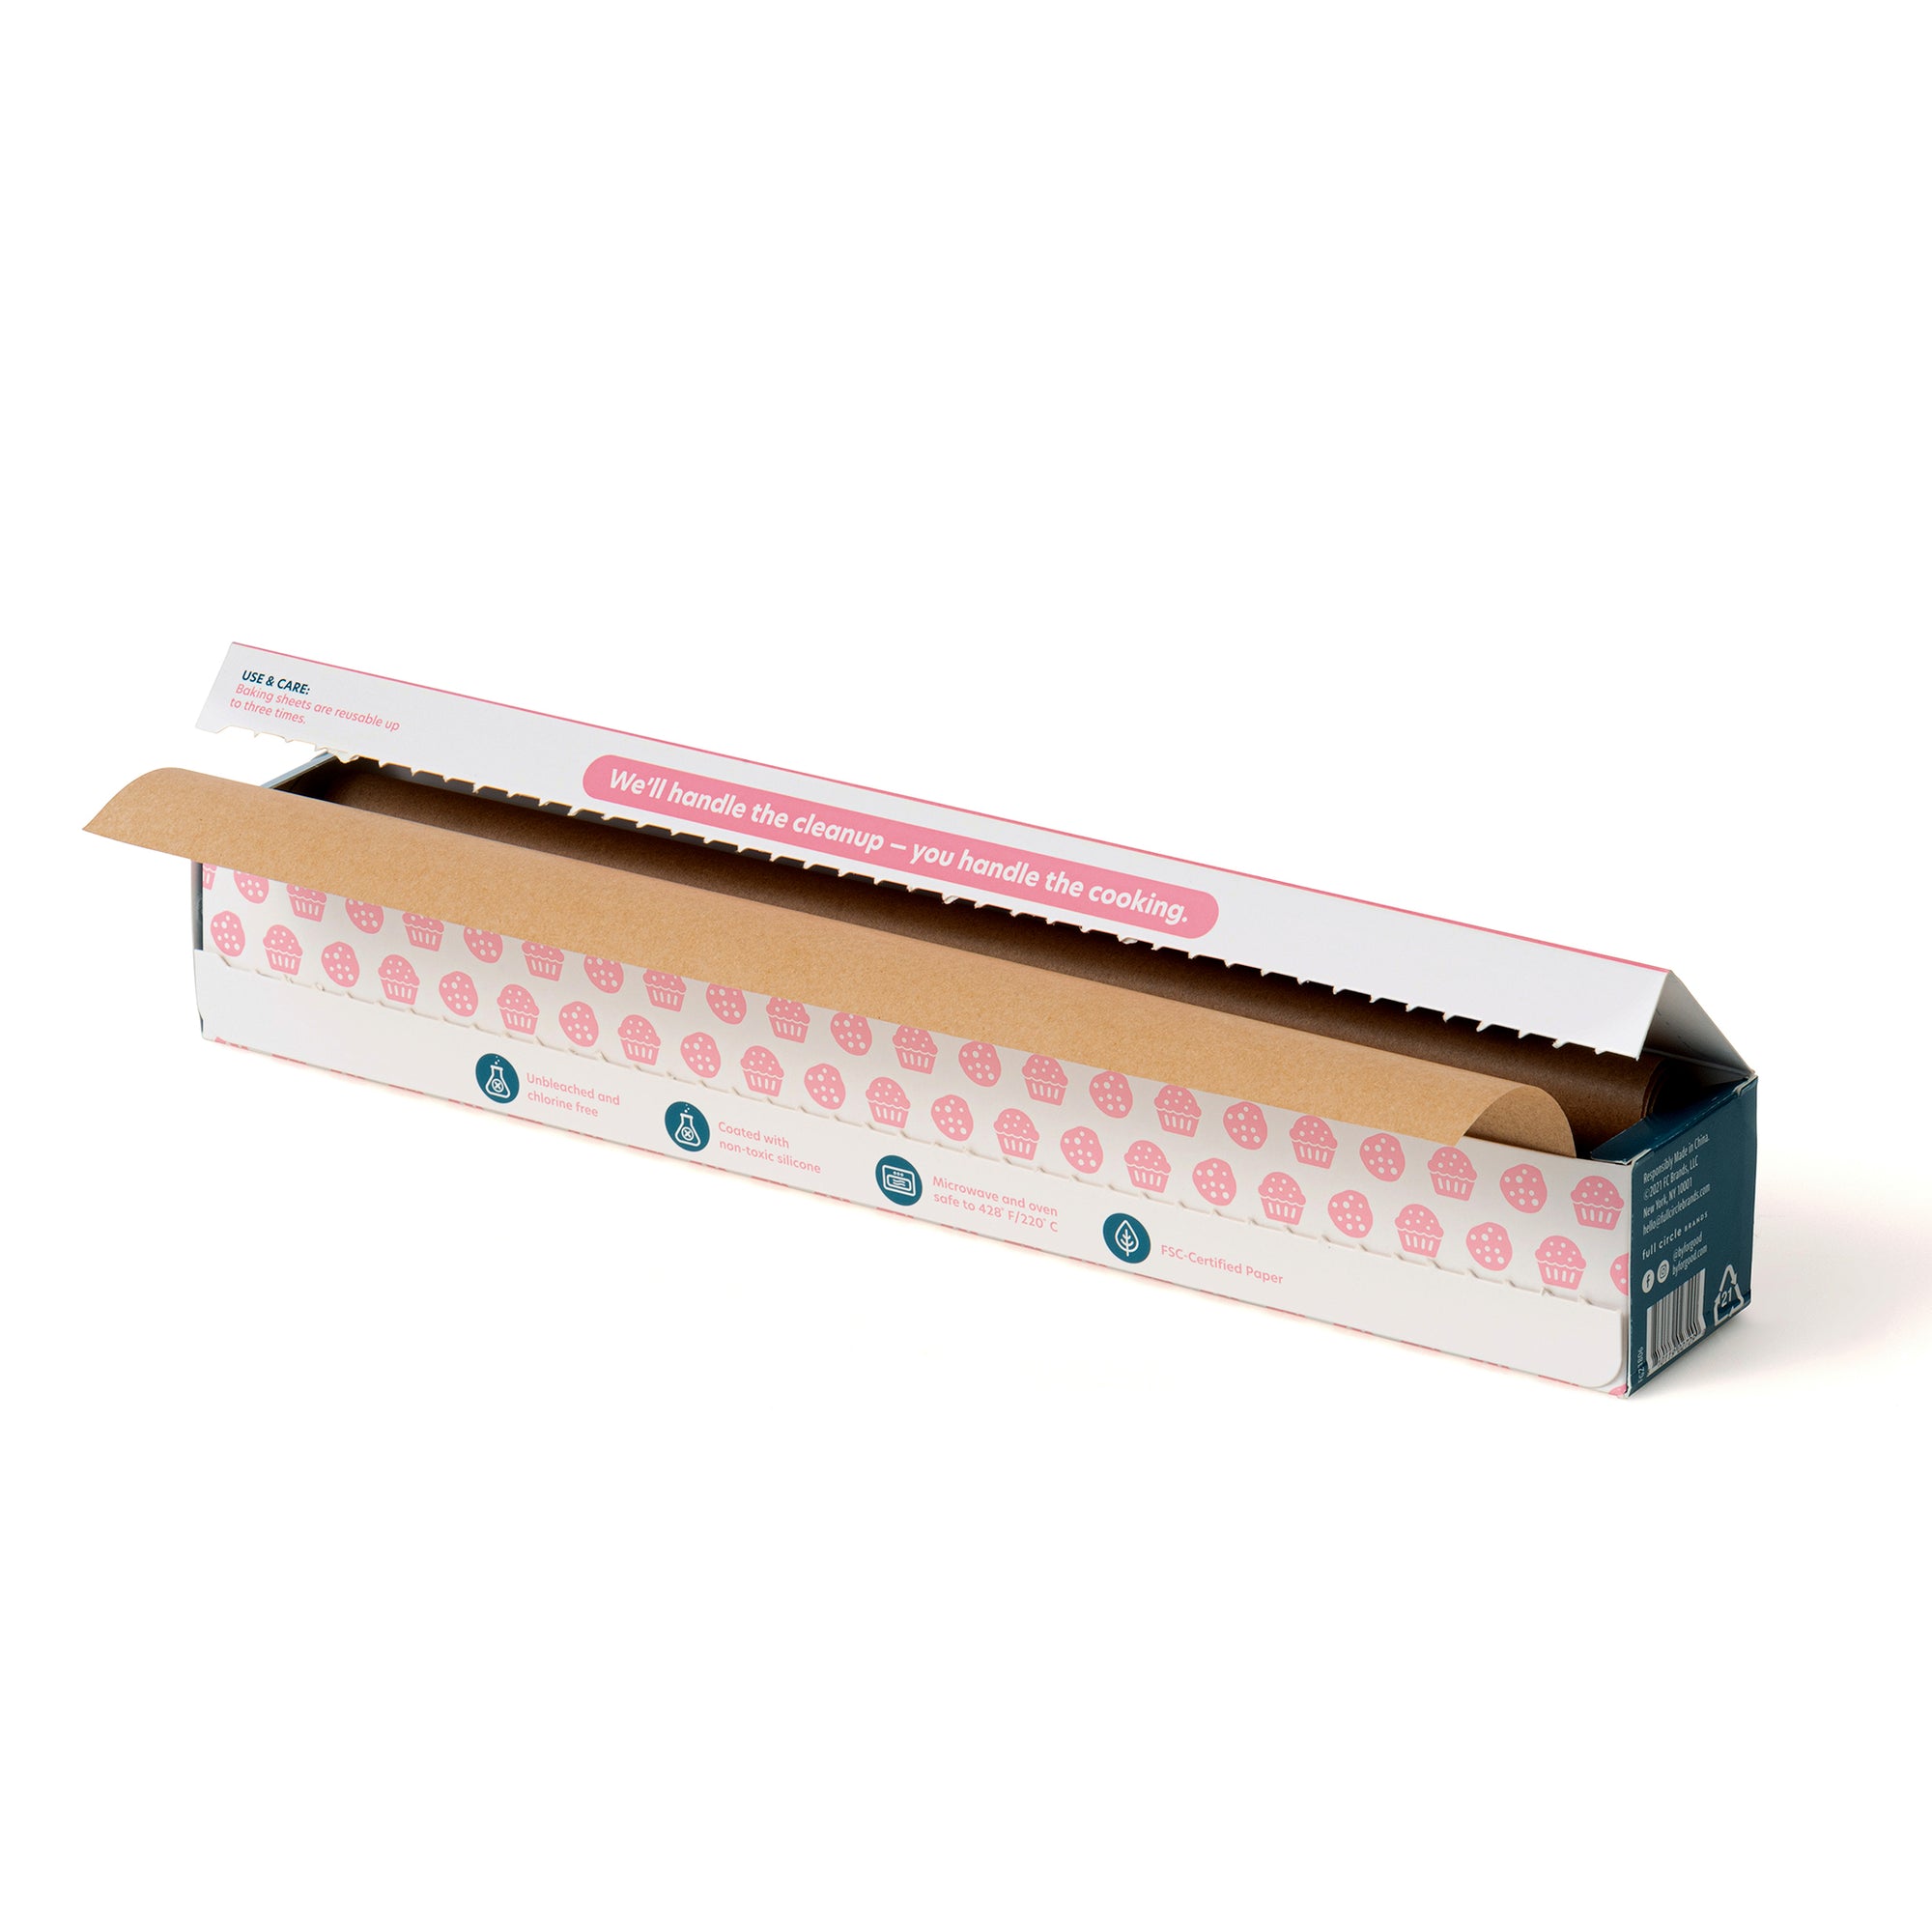 24 Pack: Parchment Paper Roll by Celebrate It®